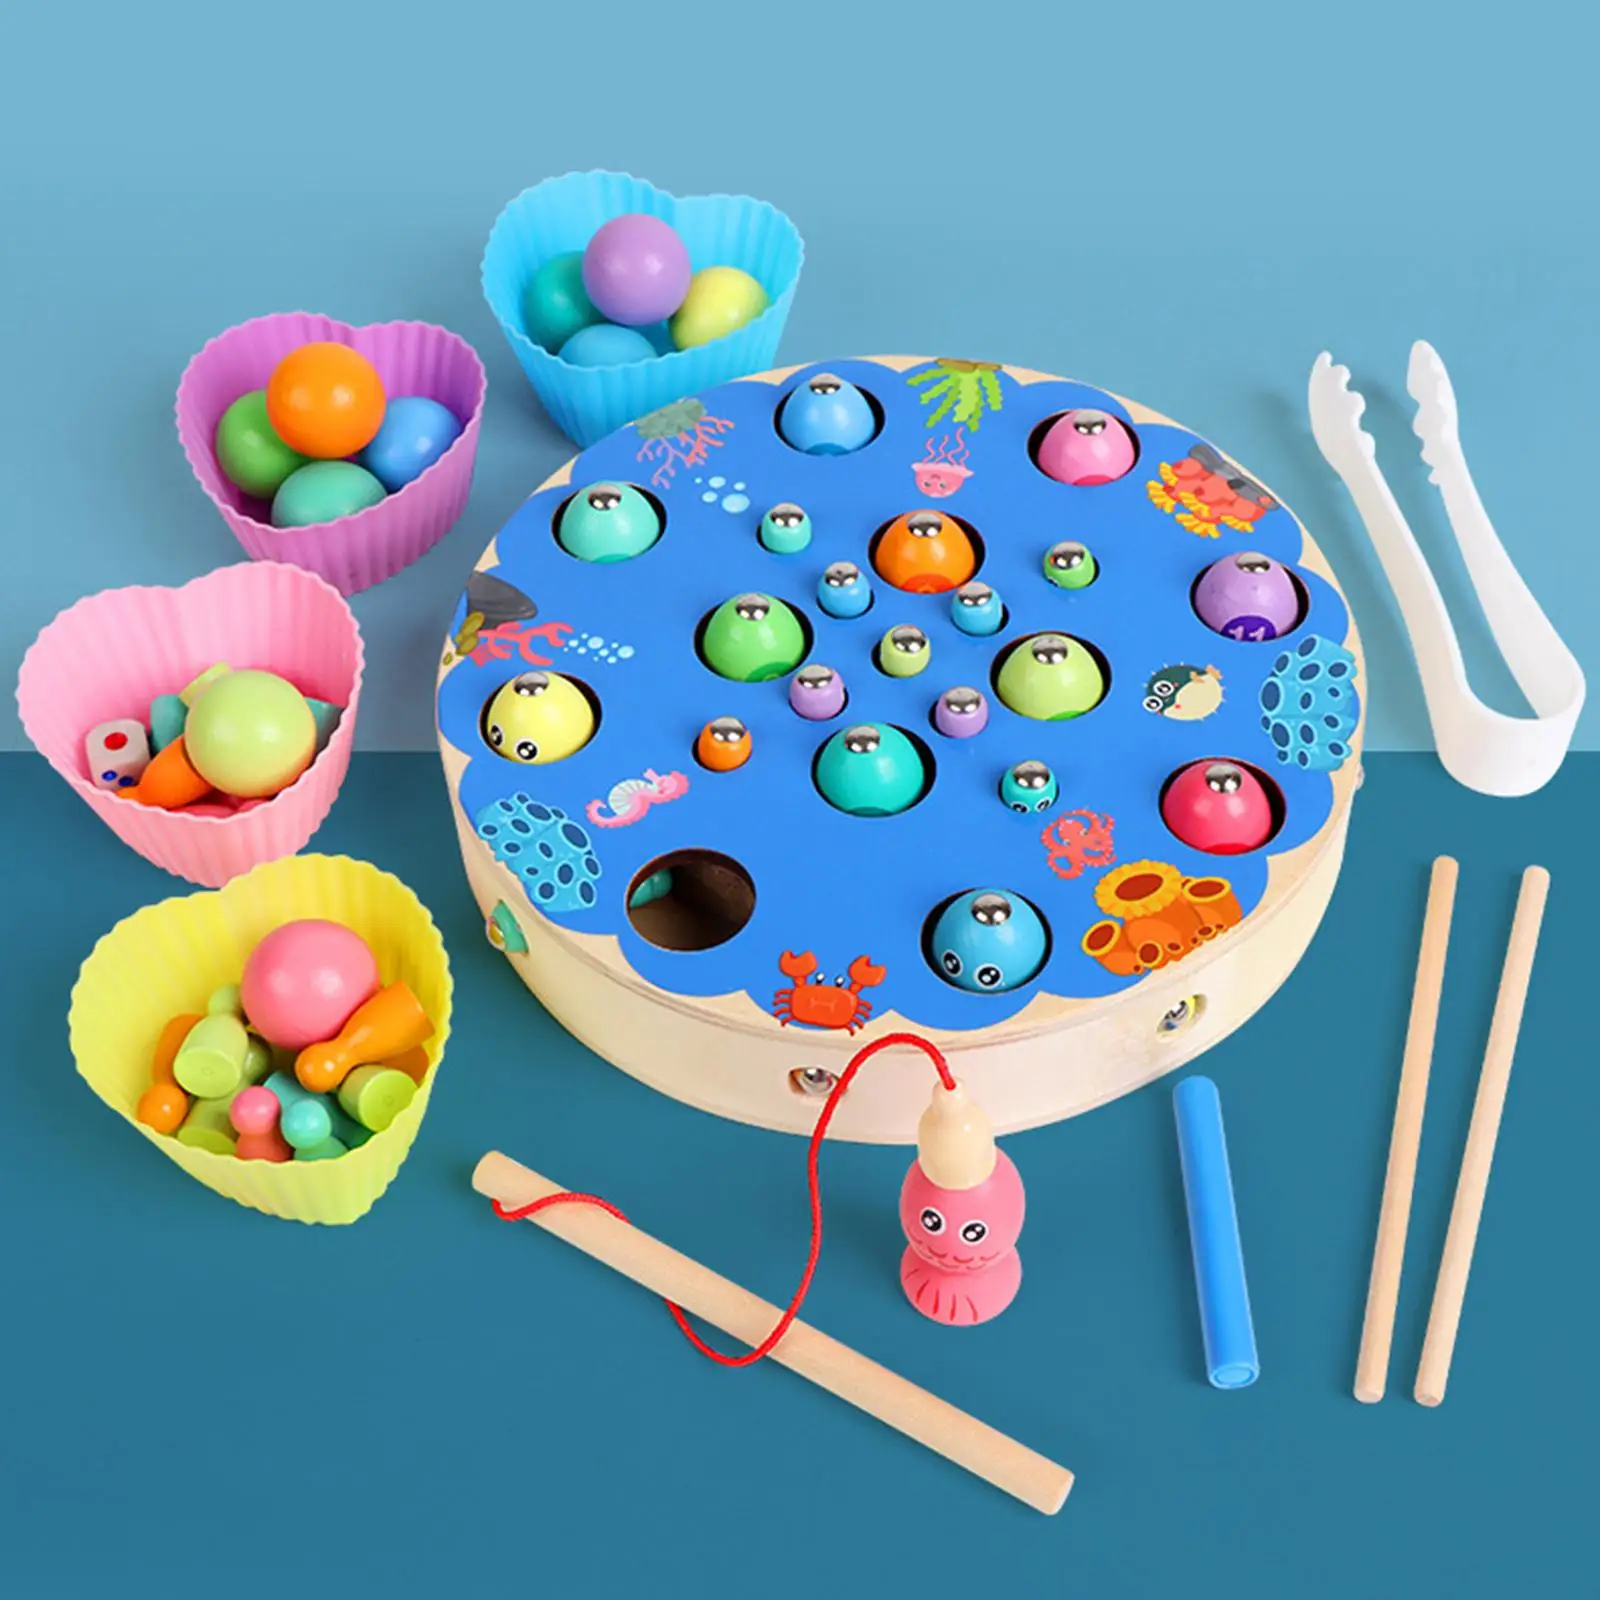 Multicolor Montessori Toys Educational with Chess Chopsticks Developmental Fine Motor Skill Learning Toy for Teaching Birthday